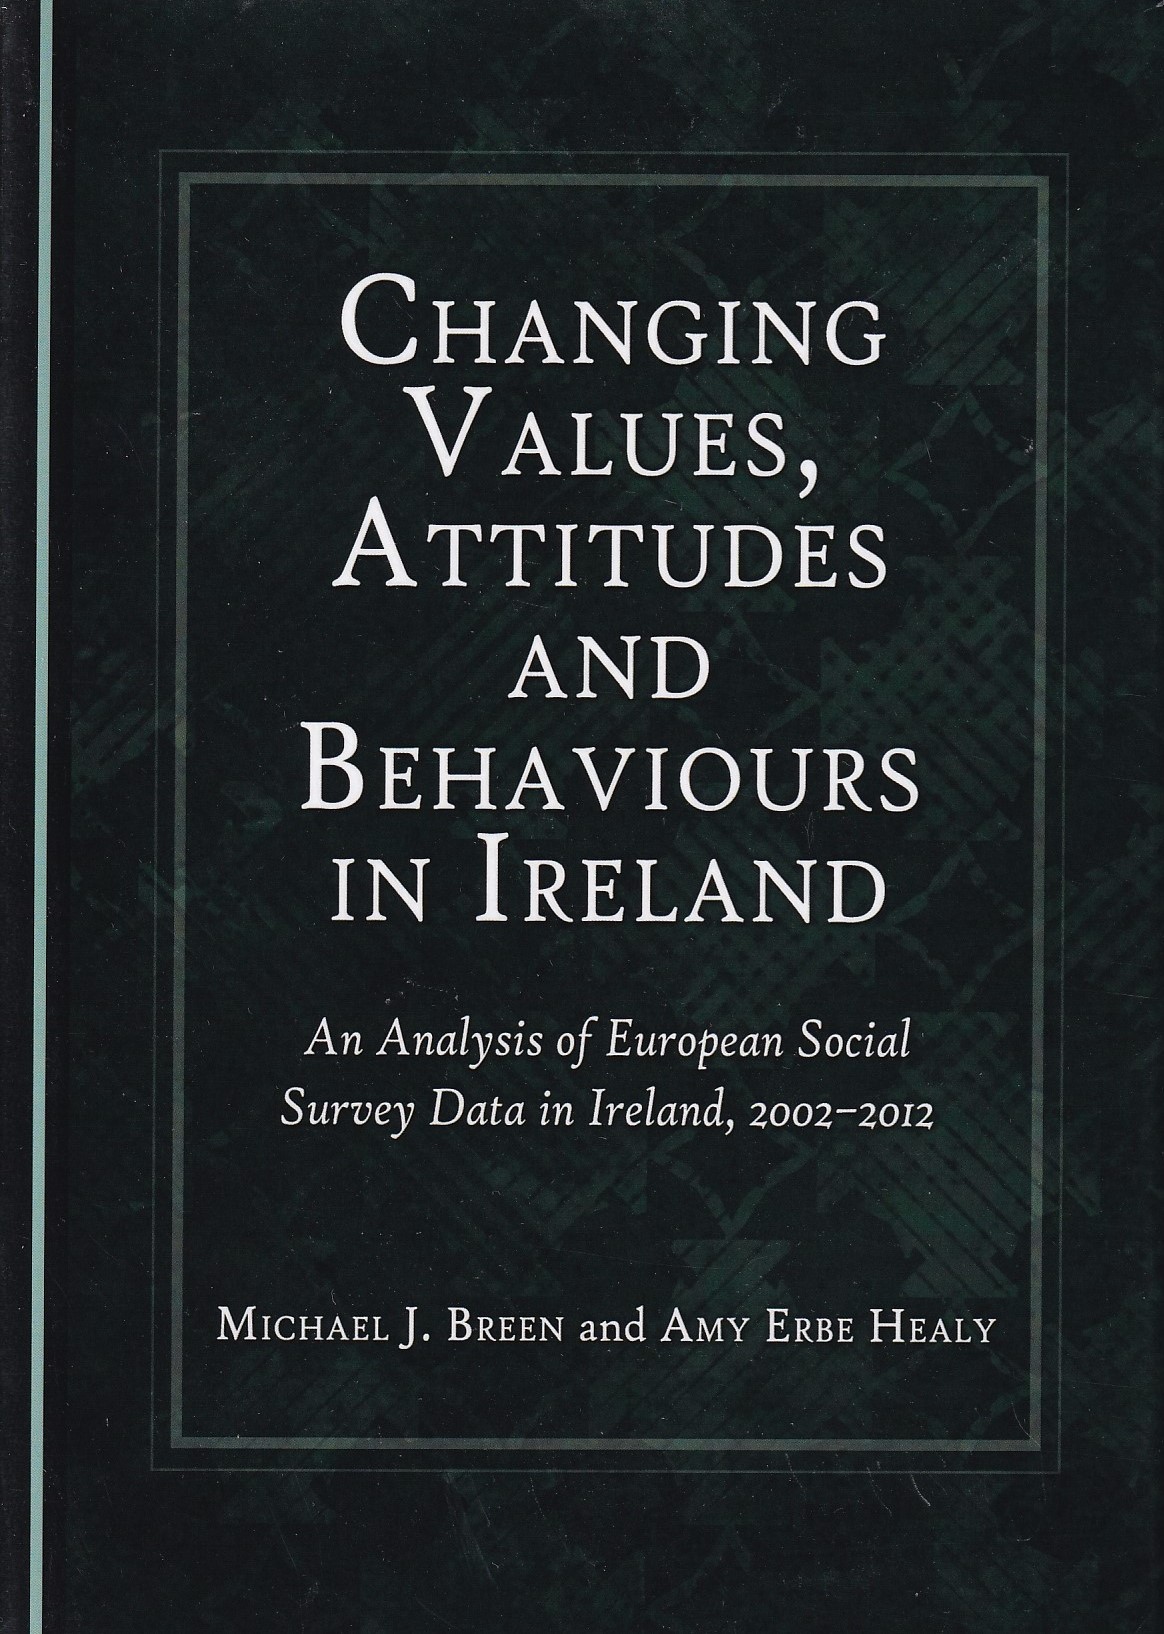 Changing Values, Attitudes and Behaviours in Ireland: An Analysis of European Social Survey Data in Ireland, 2002-2012 by Michael J. Breen & Amy Erbe Healy